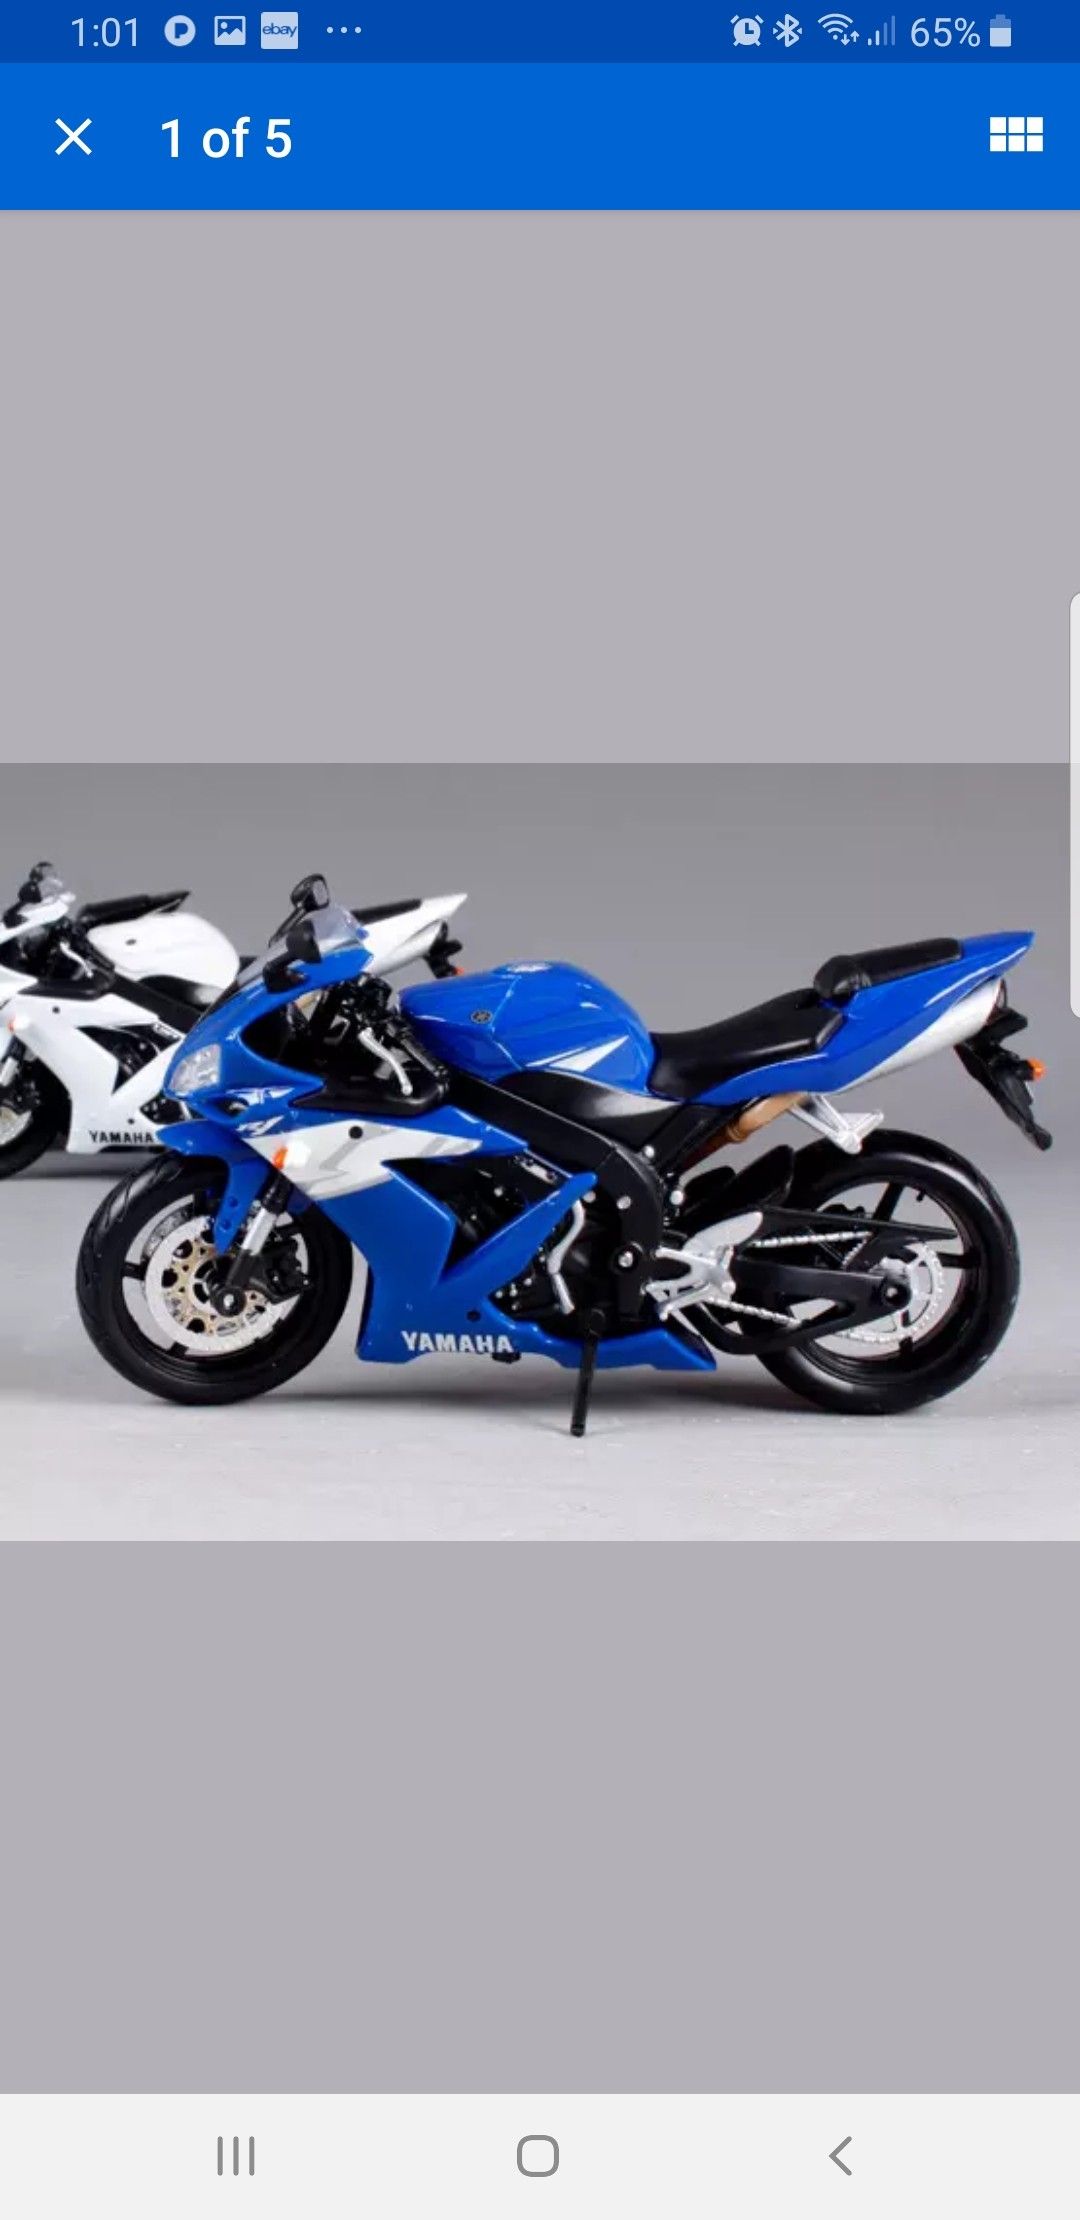 Yamaha YZF-R1 die cast motorcycle